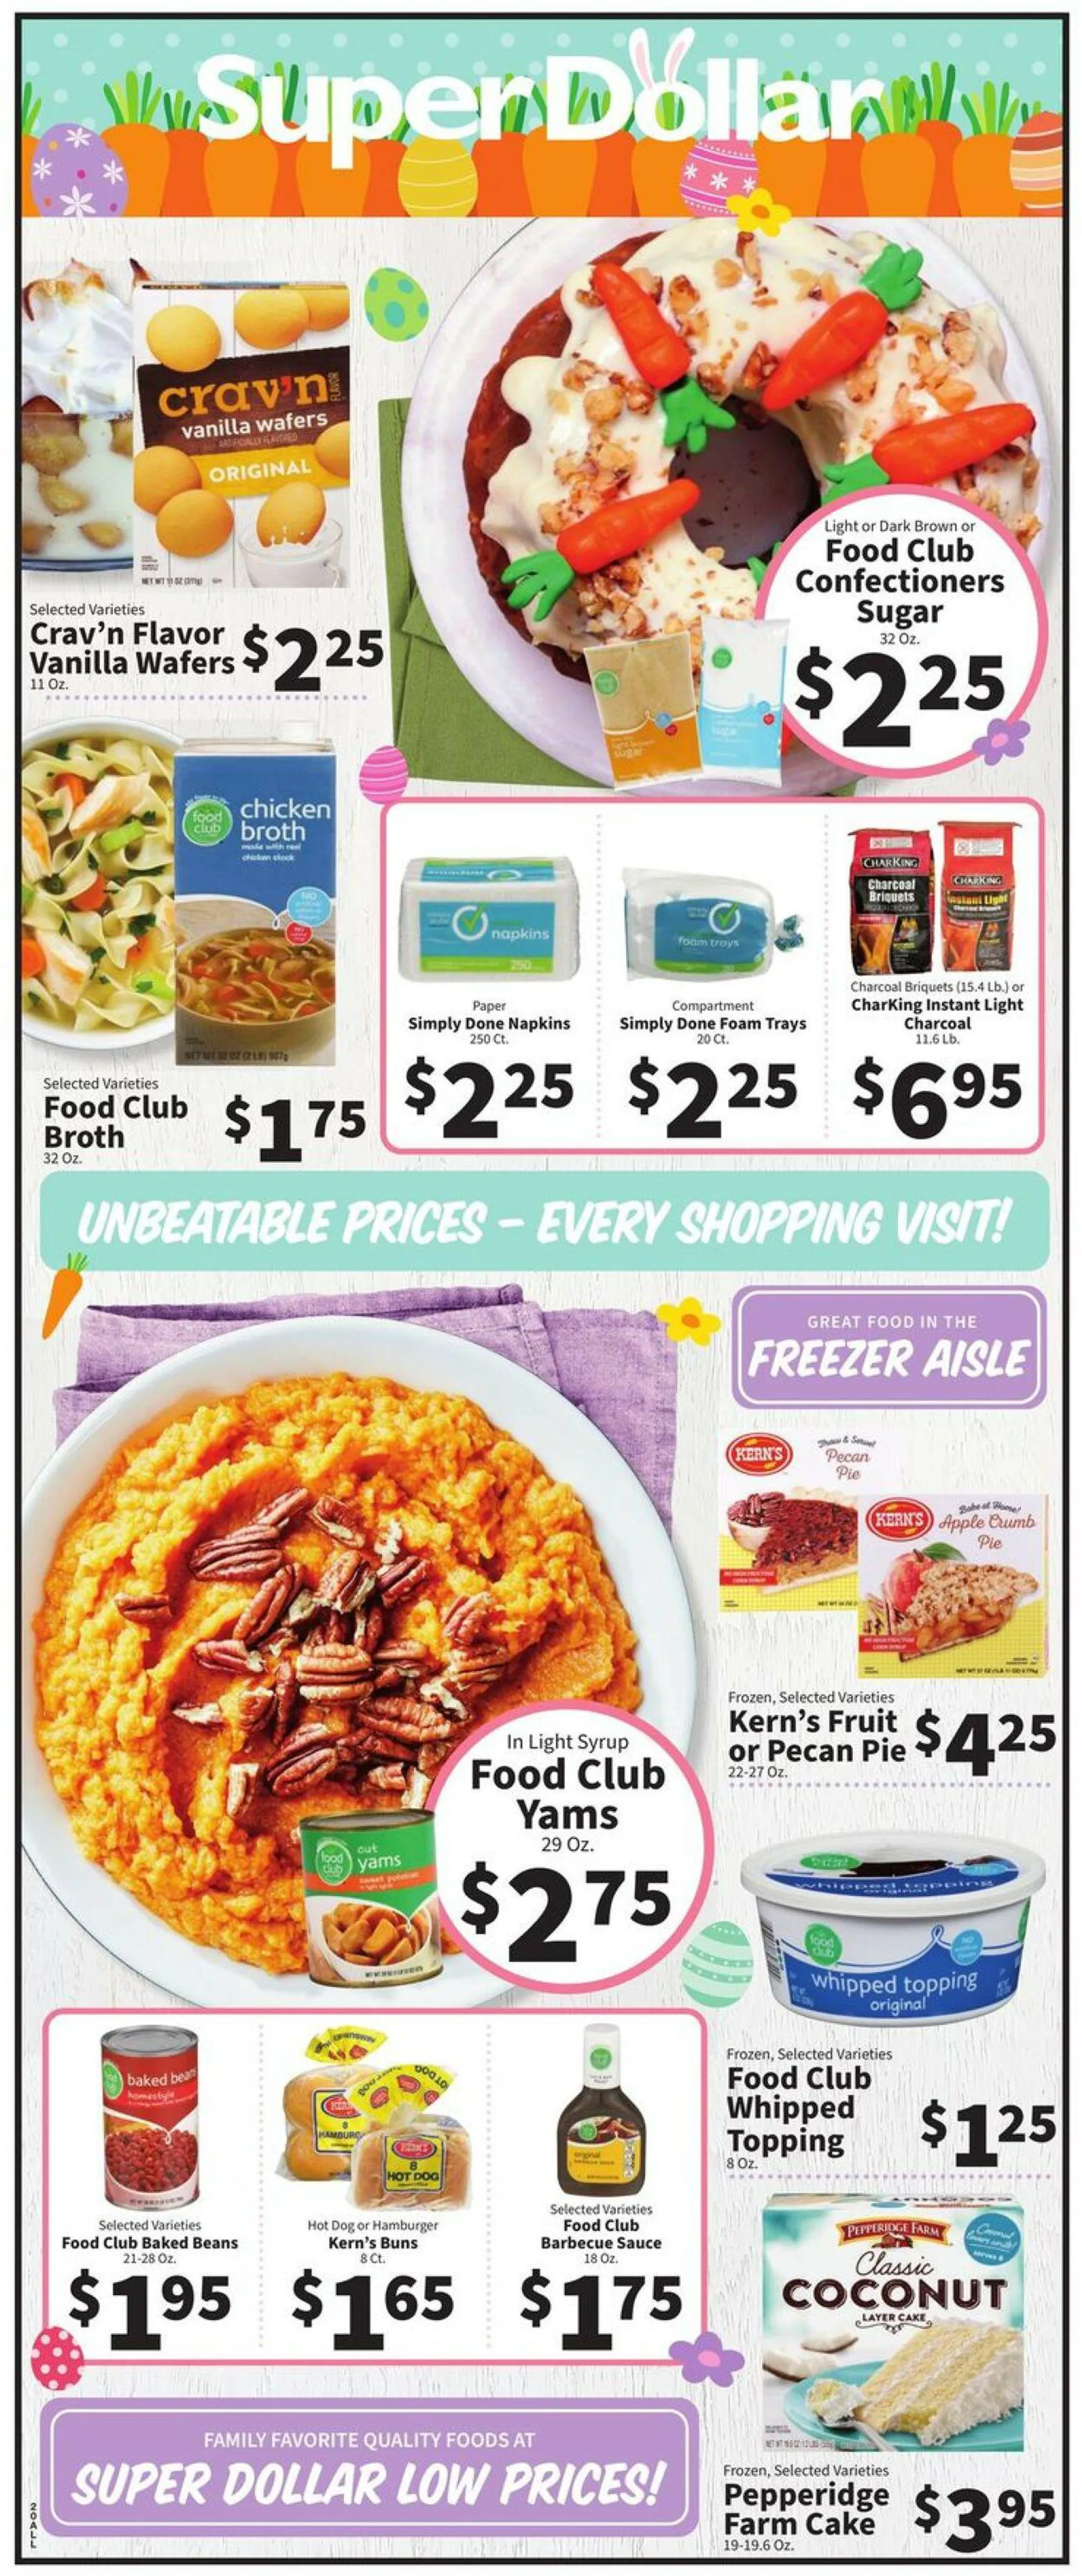 Super Dollar Food Center Current weekly ad - 2